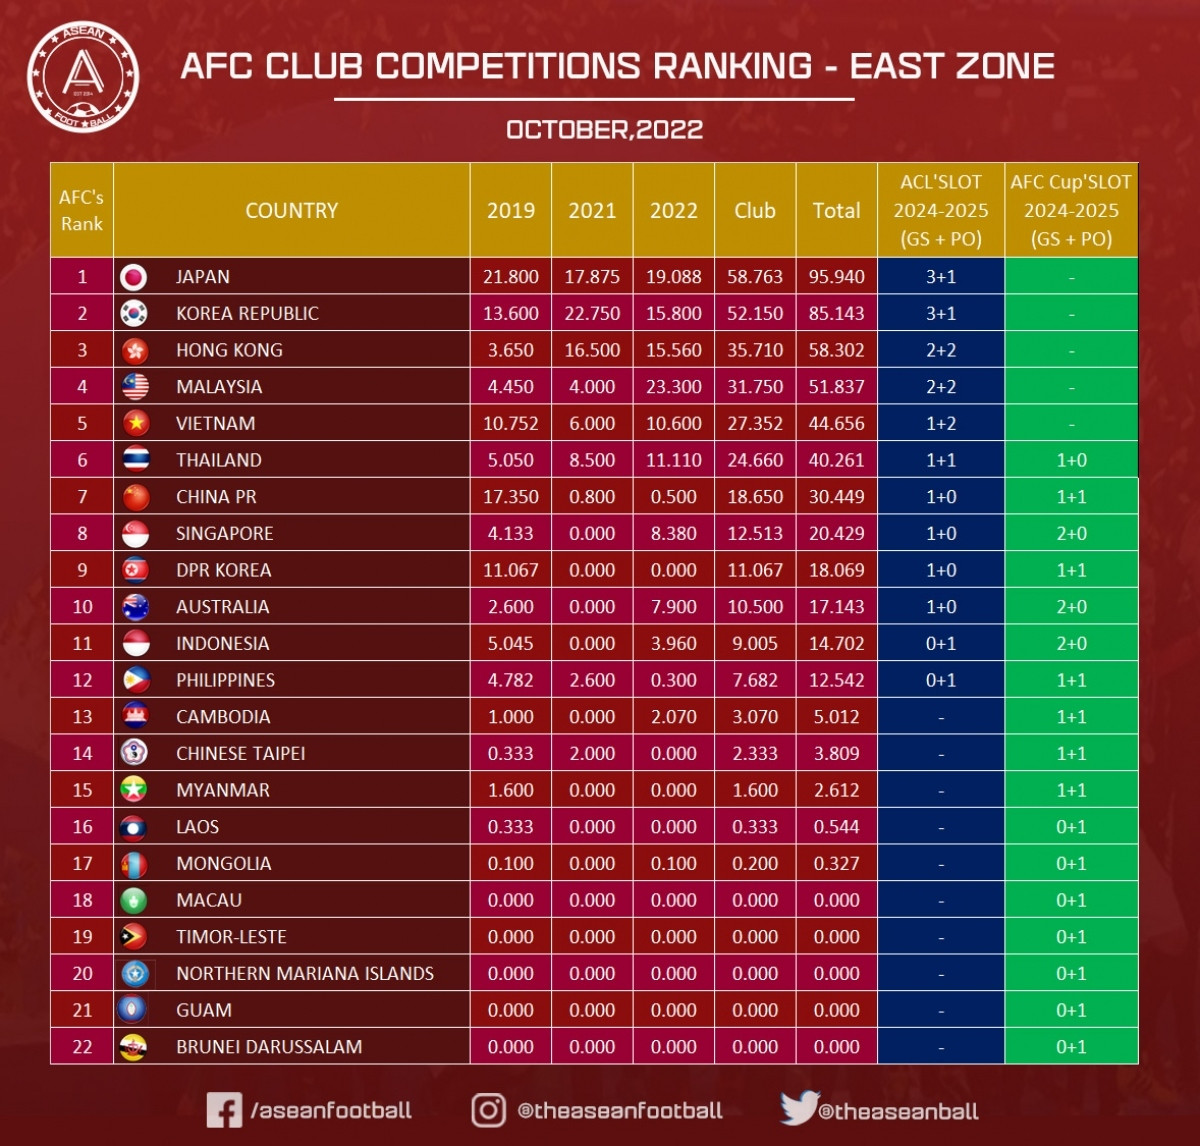 V.League 1 placed higher than Thai and Chinese Leagues at AFC’s rankings